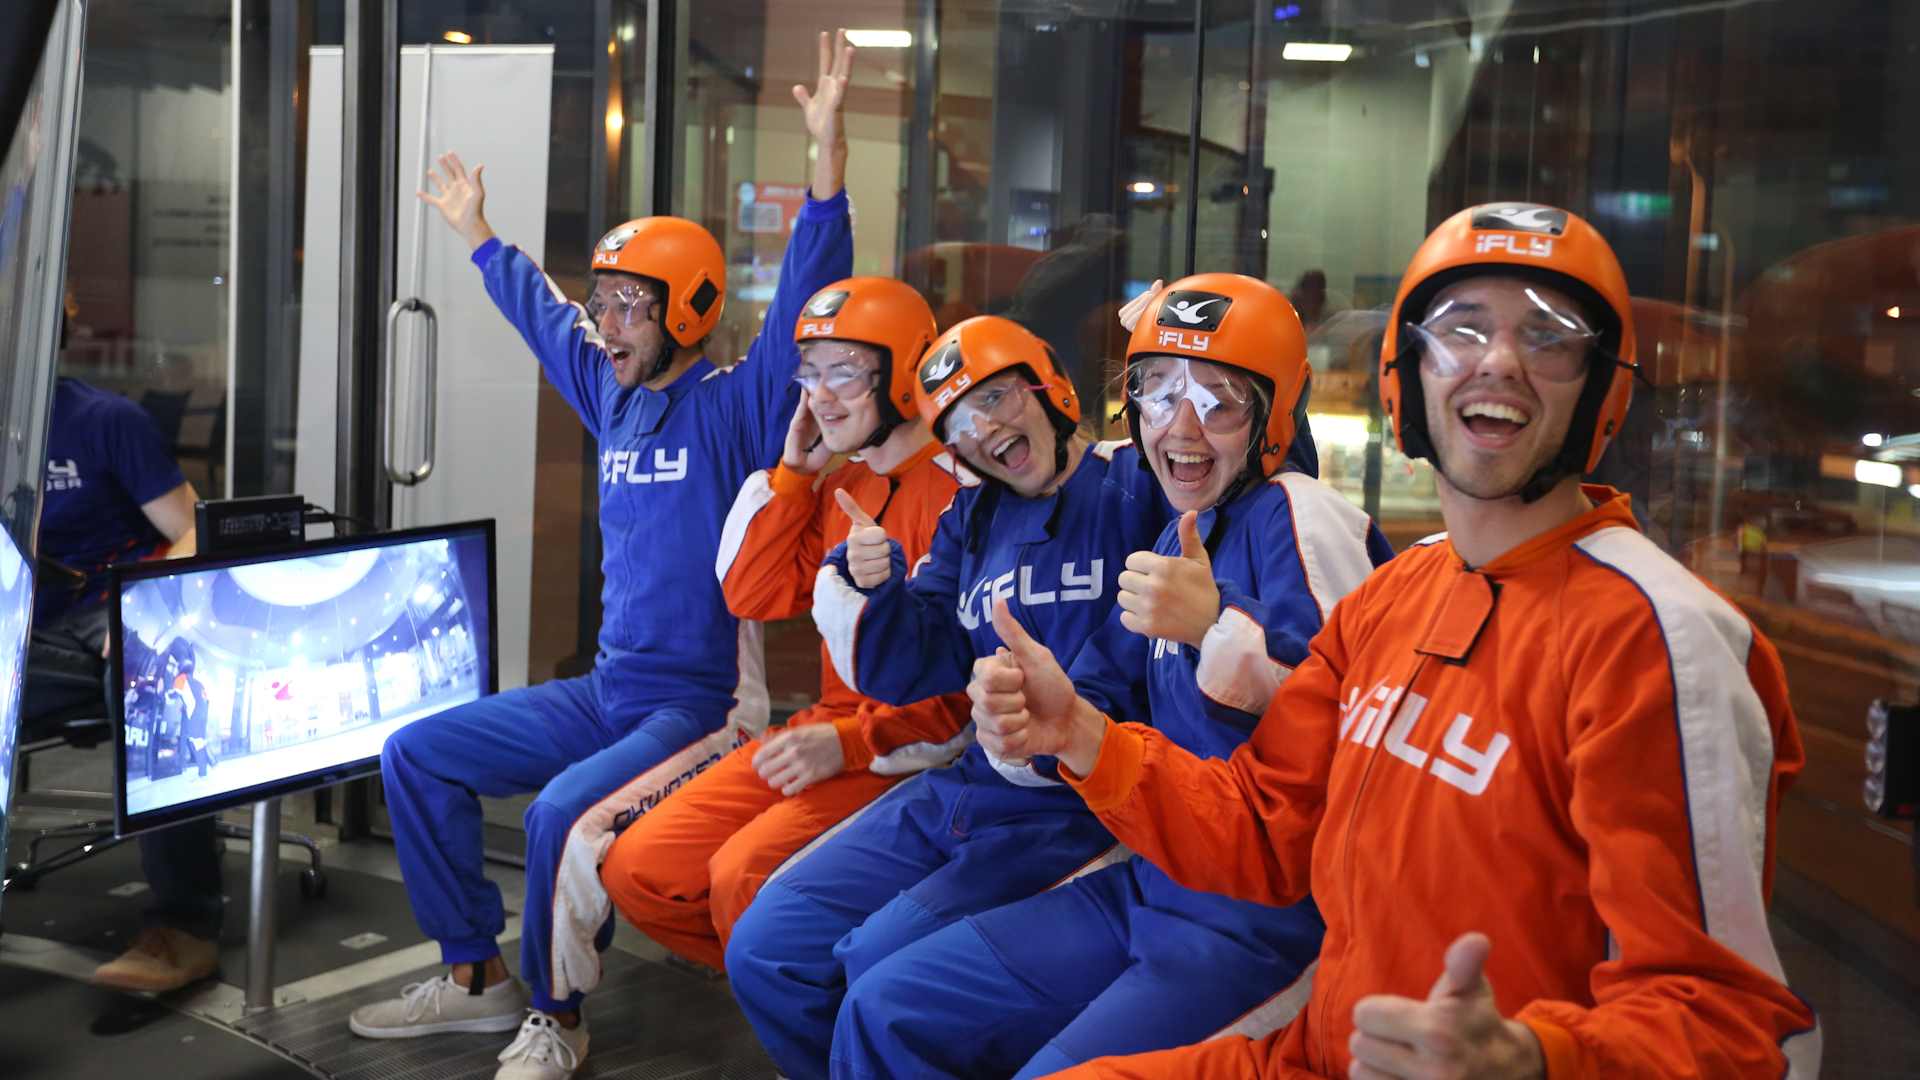 A group of adults wearing iFLY jumpsuits, cheering and excited to fly.